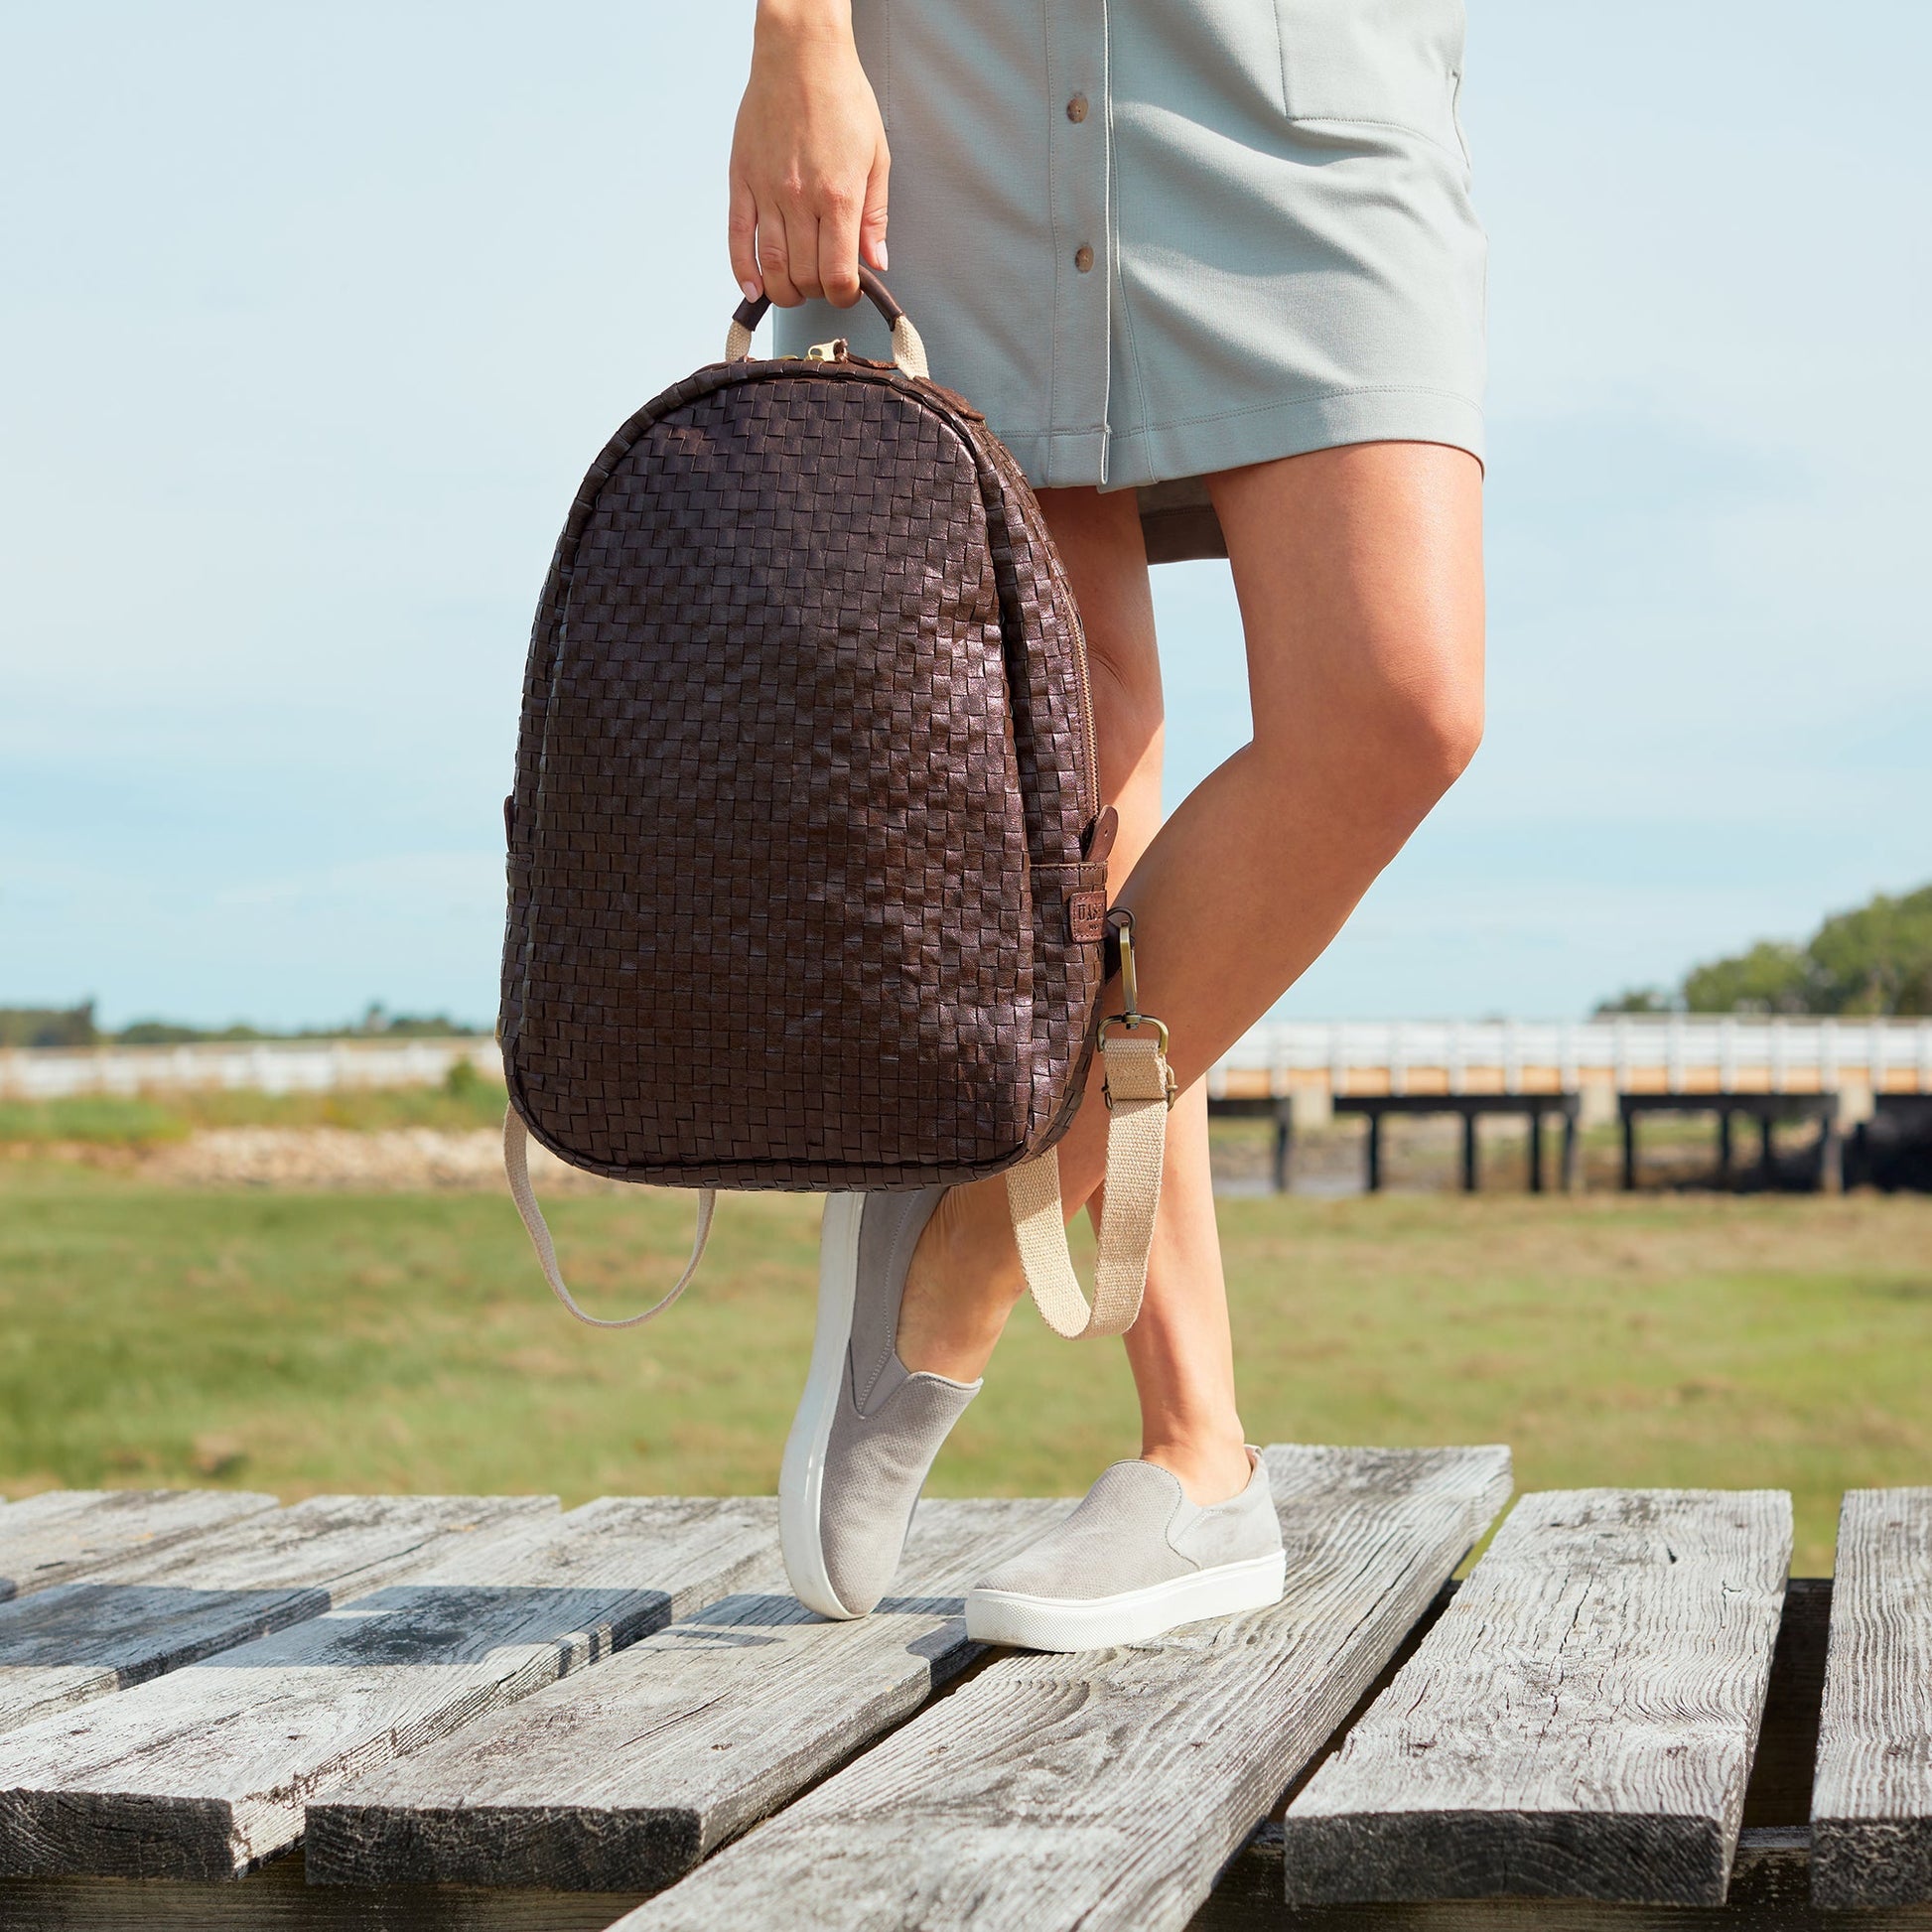 A woman is shown standing on decking, wearing a dress and plimsolls. In her right hand she holds a chocolate brown washable paper backpack by its top handle. 